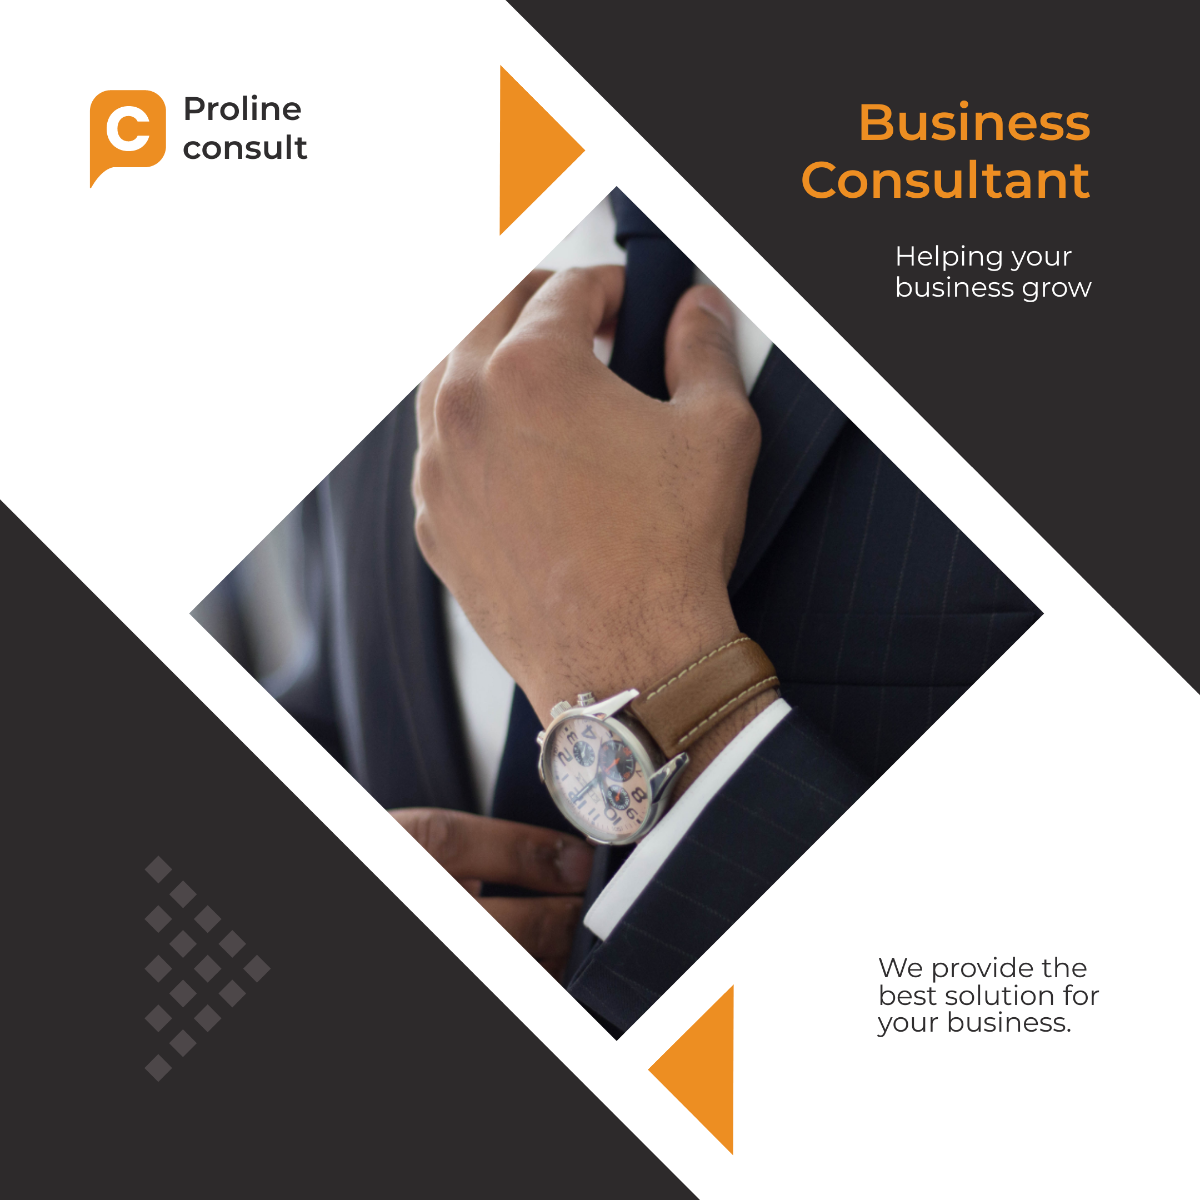 Business Consultant Instagram Post Template